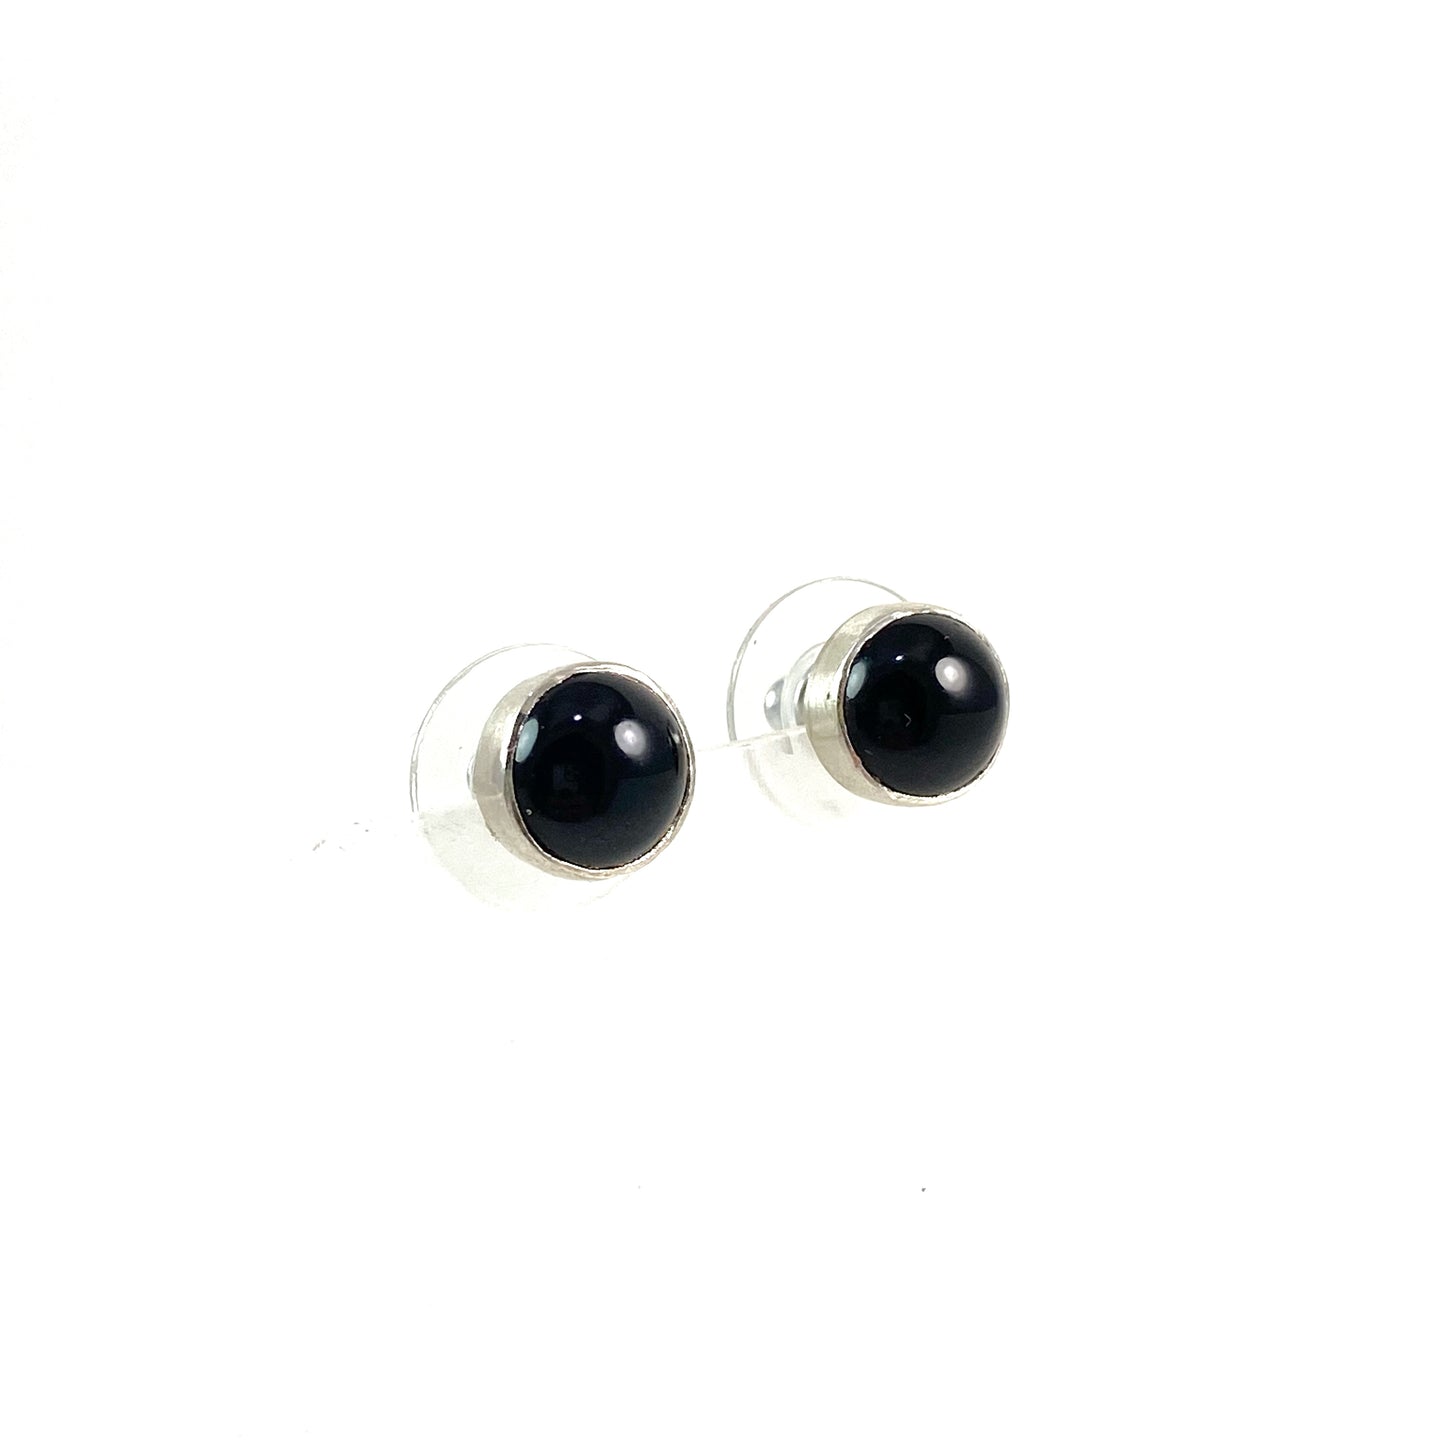 Circle post earrings in black glass, fused glass, glass jewelry, glass and silver jewelry, handmade, handcrafted, American Craft, hand fabricated jewelry, hand fabricated jewellery, Athen, Georgia, colorful jewelry, sparkle, bullseye glass, dichroic glass, art jewelry